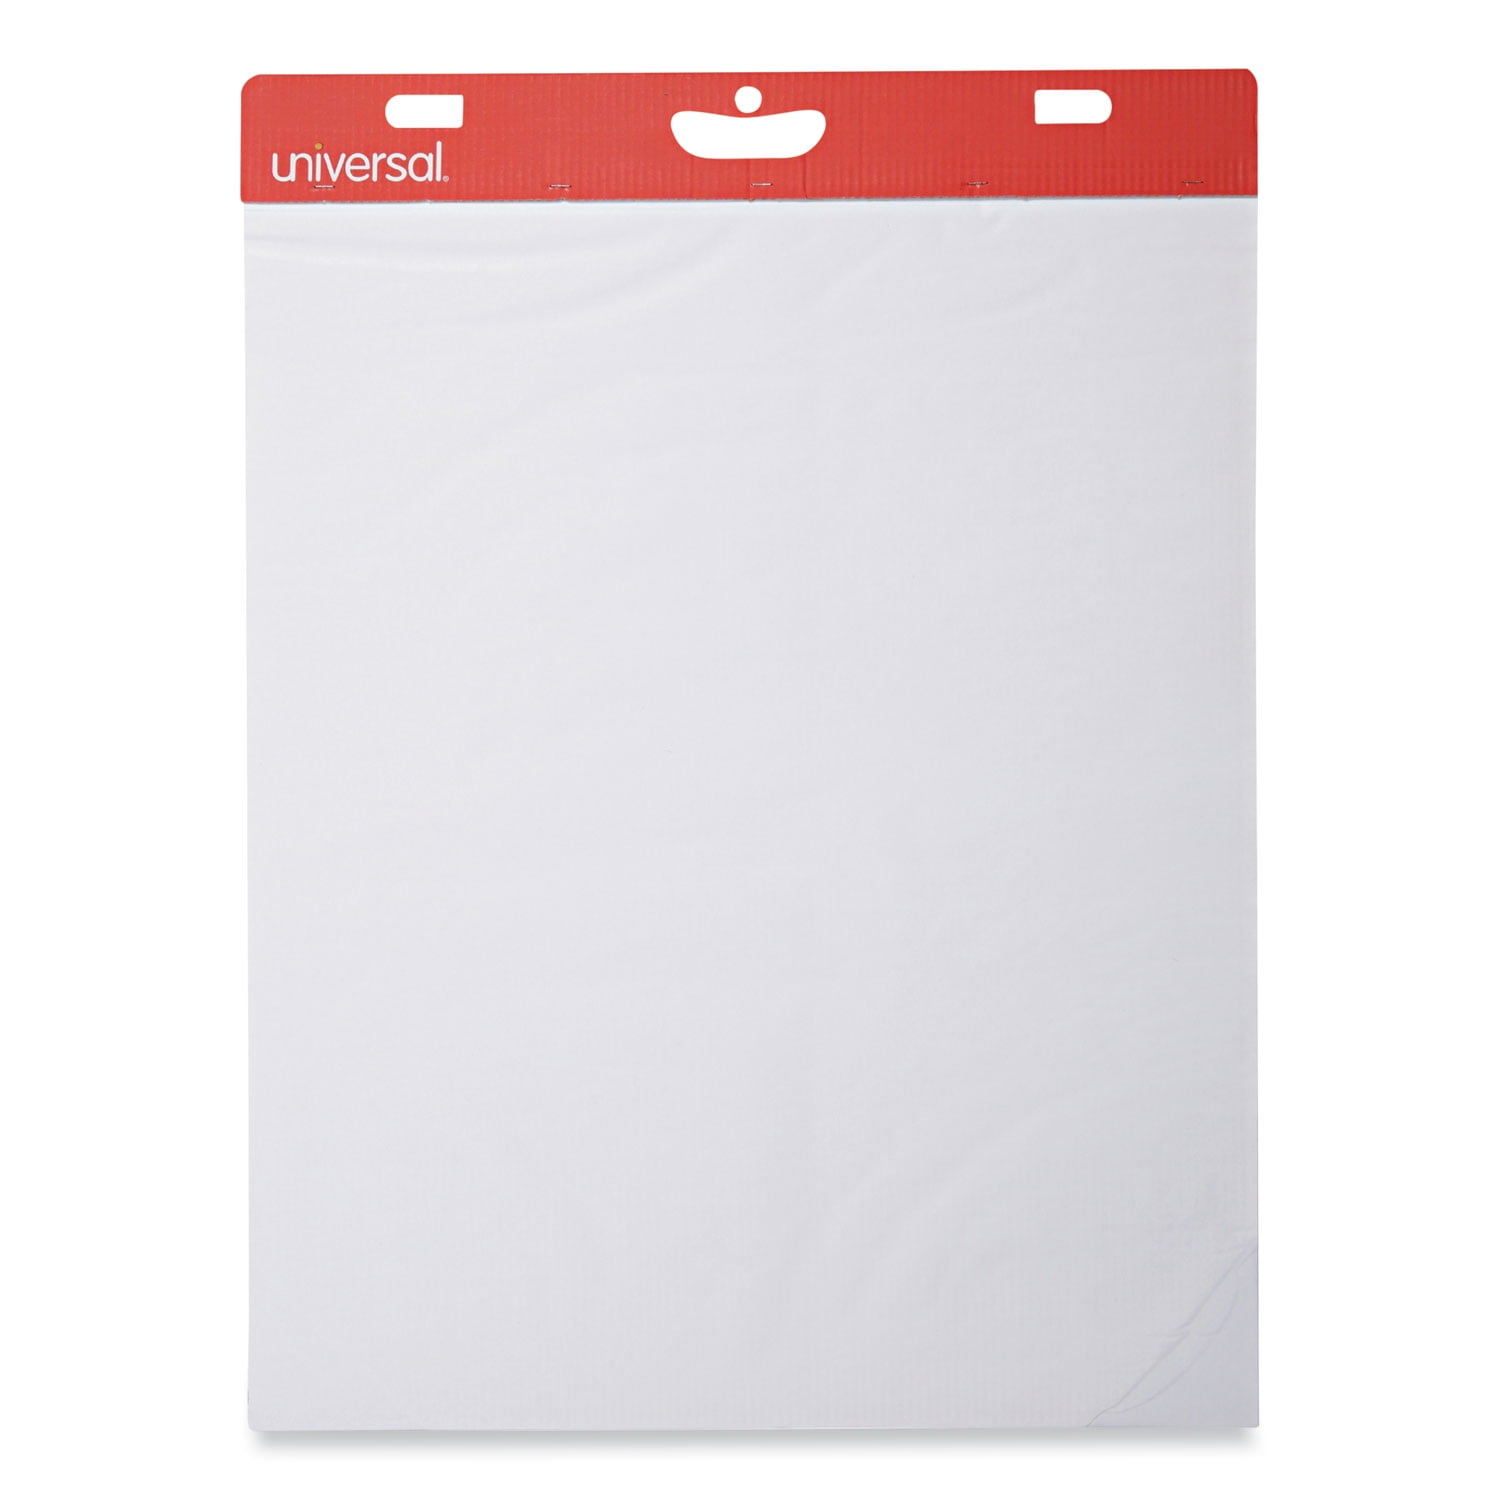 Business Source 25x30 Lined Self-stick Easel Pads - Zerbee